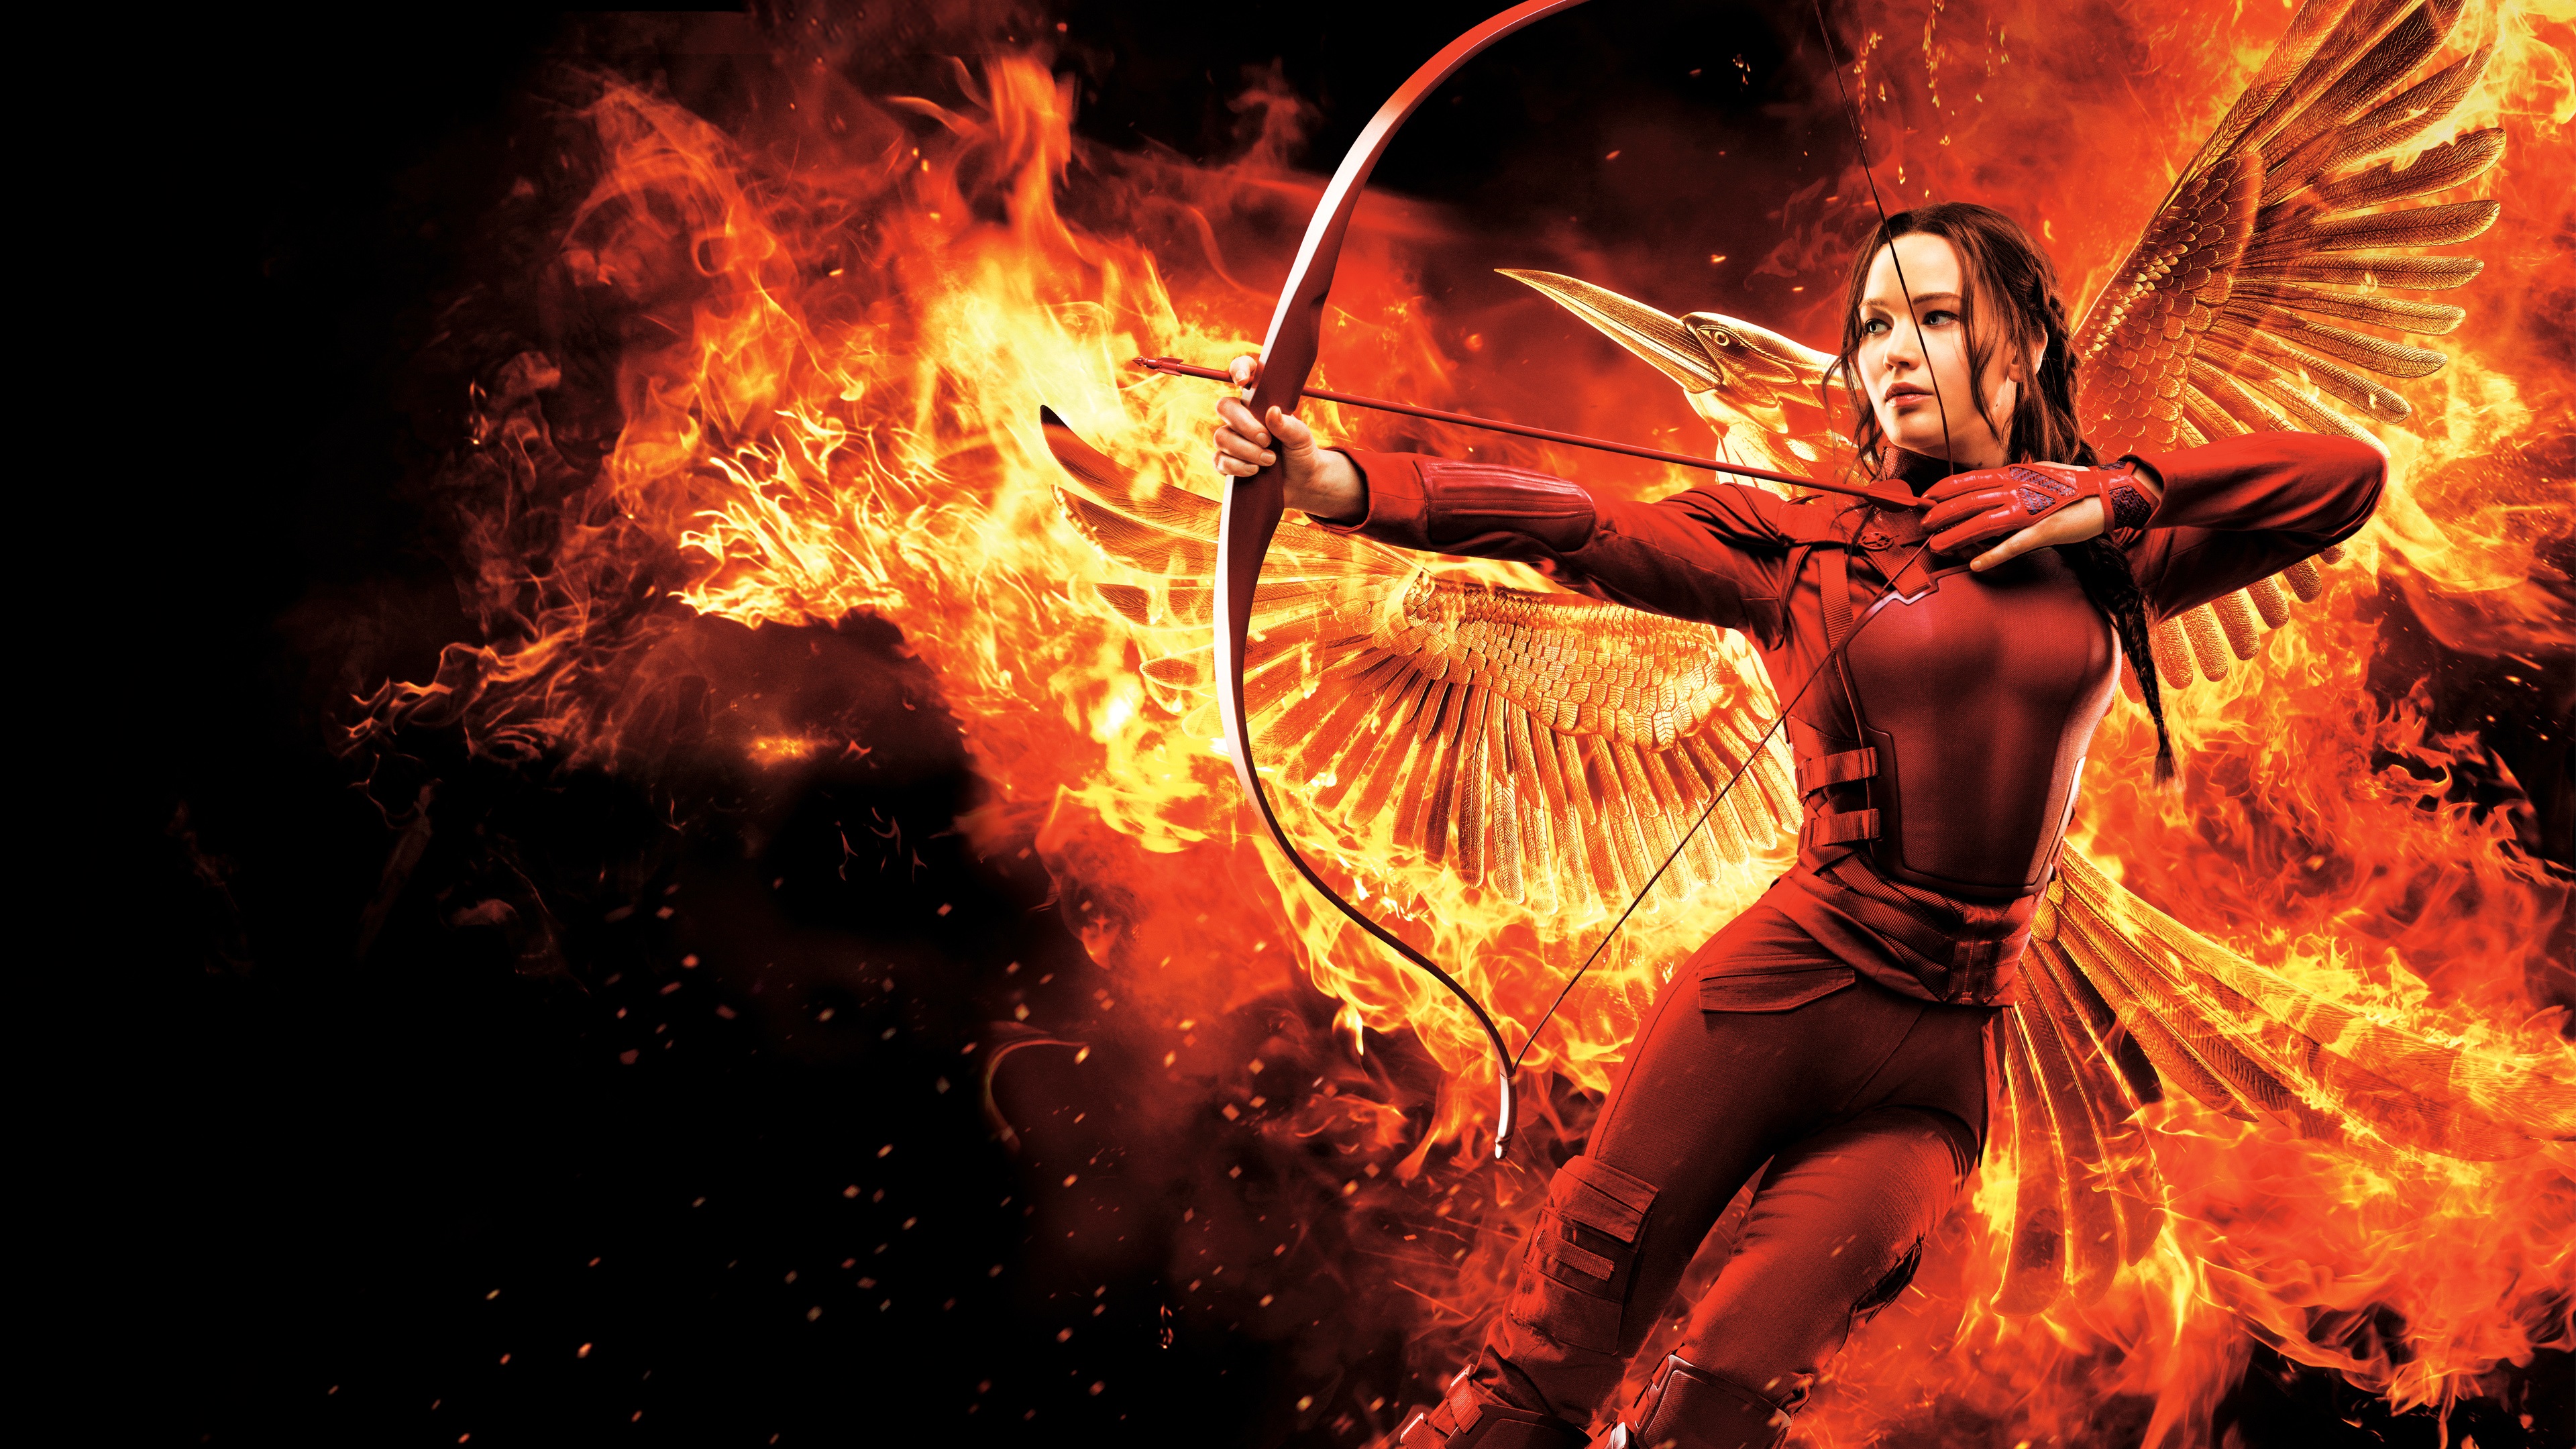 movie, the hunger games: mockingjay part 2, bow, fire, flame, jennifer lawrence, katniss everdeen, phoenix, wings, the hunger games